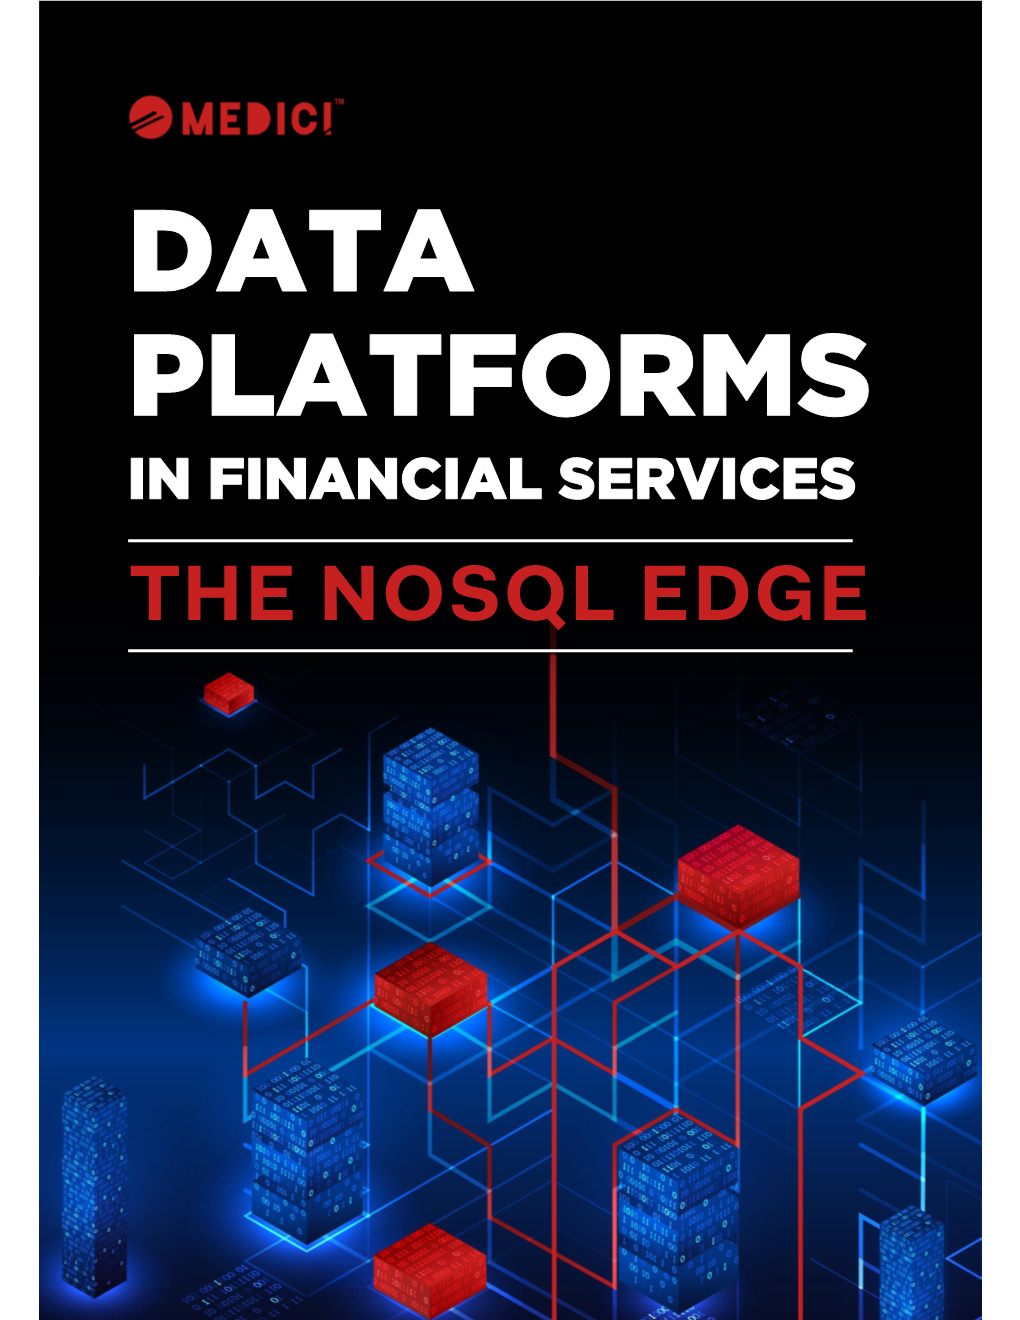 Data Platforms in Financial Services: the Nosql Edge